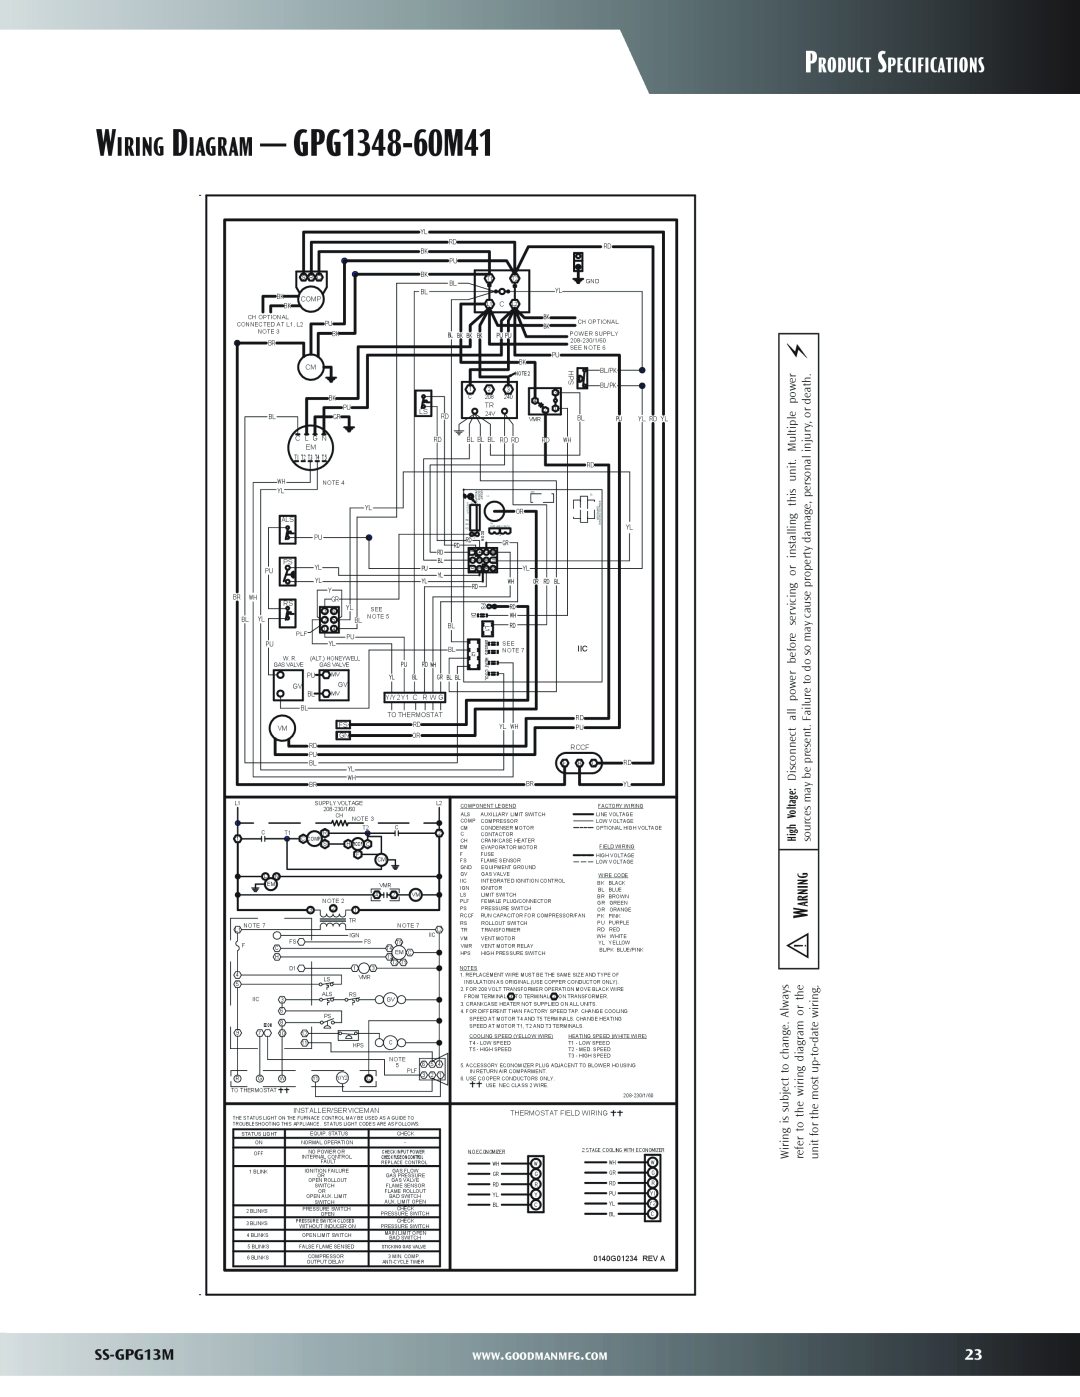 Goodman Mfg Wiring Diagram - GPG1348-60M41, Product Specifications, SS-GPG13M, deathpower, Multiple or, Disconnect 